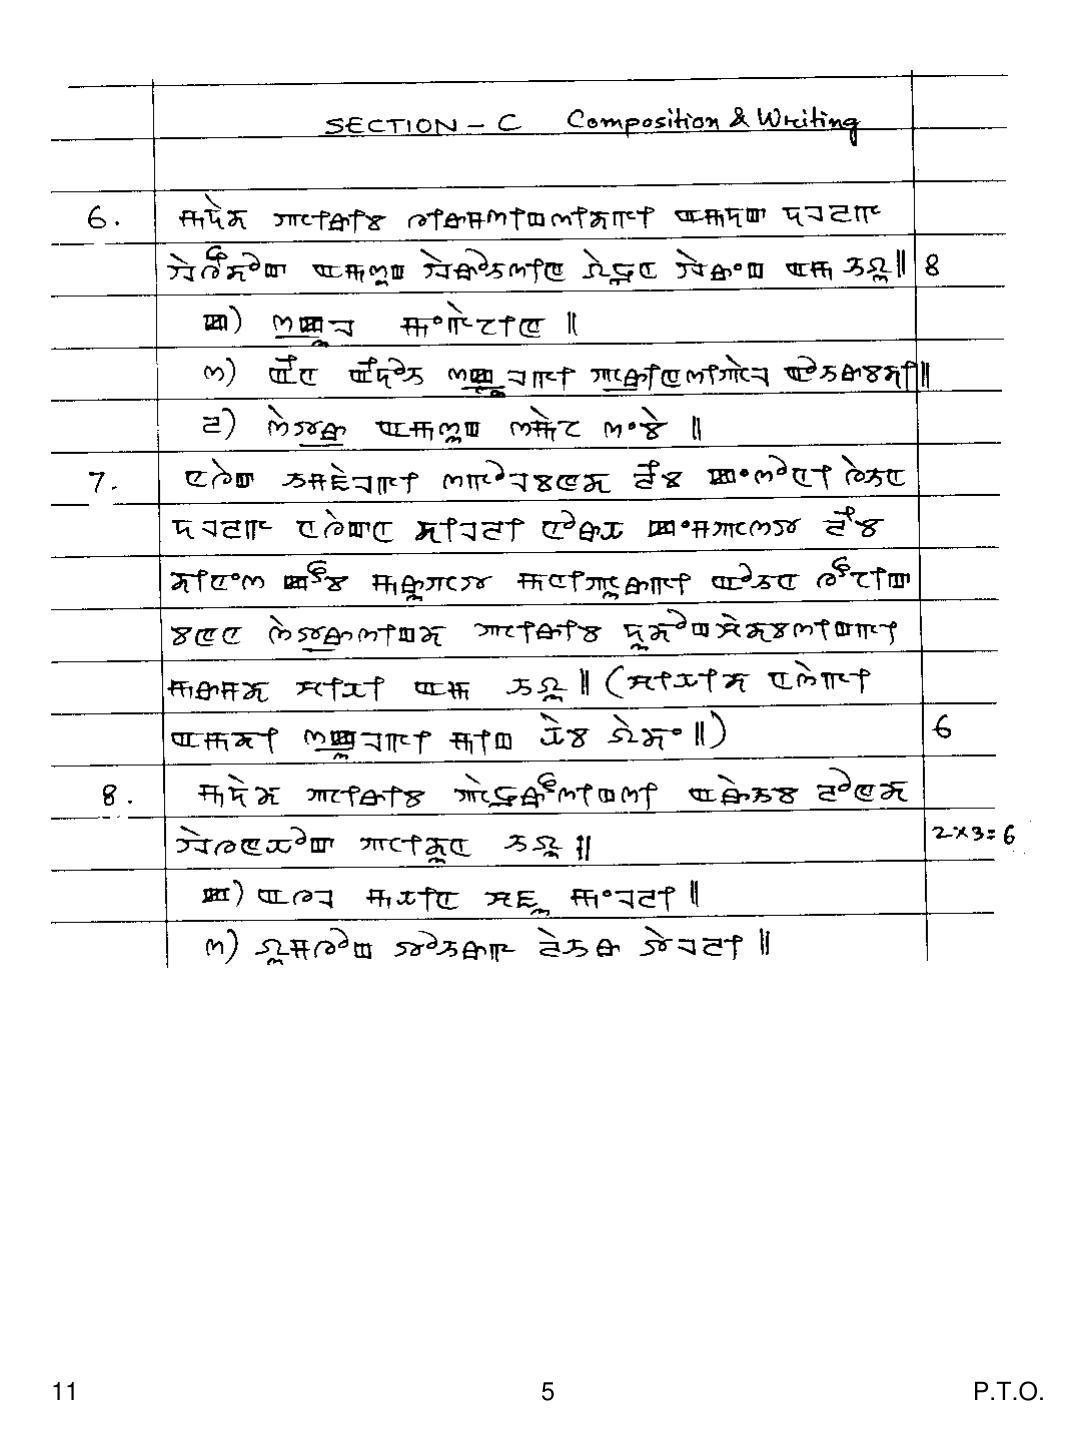 CBSE Class 12 11 Manipuri_compressed 2019 Question Paper - Page 5